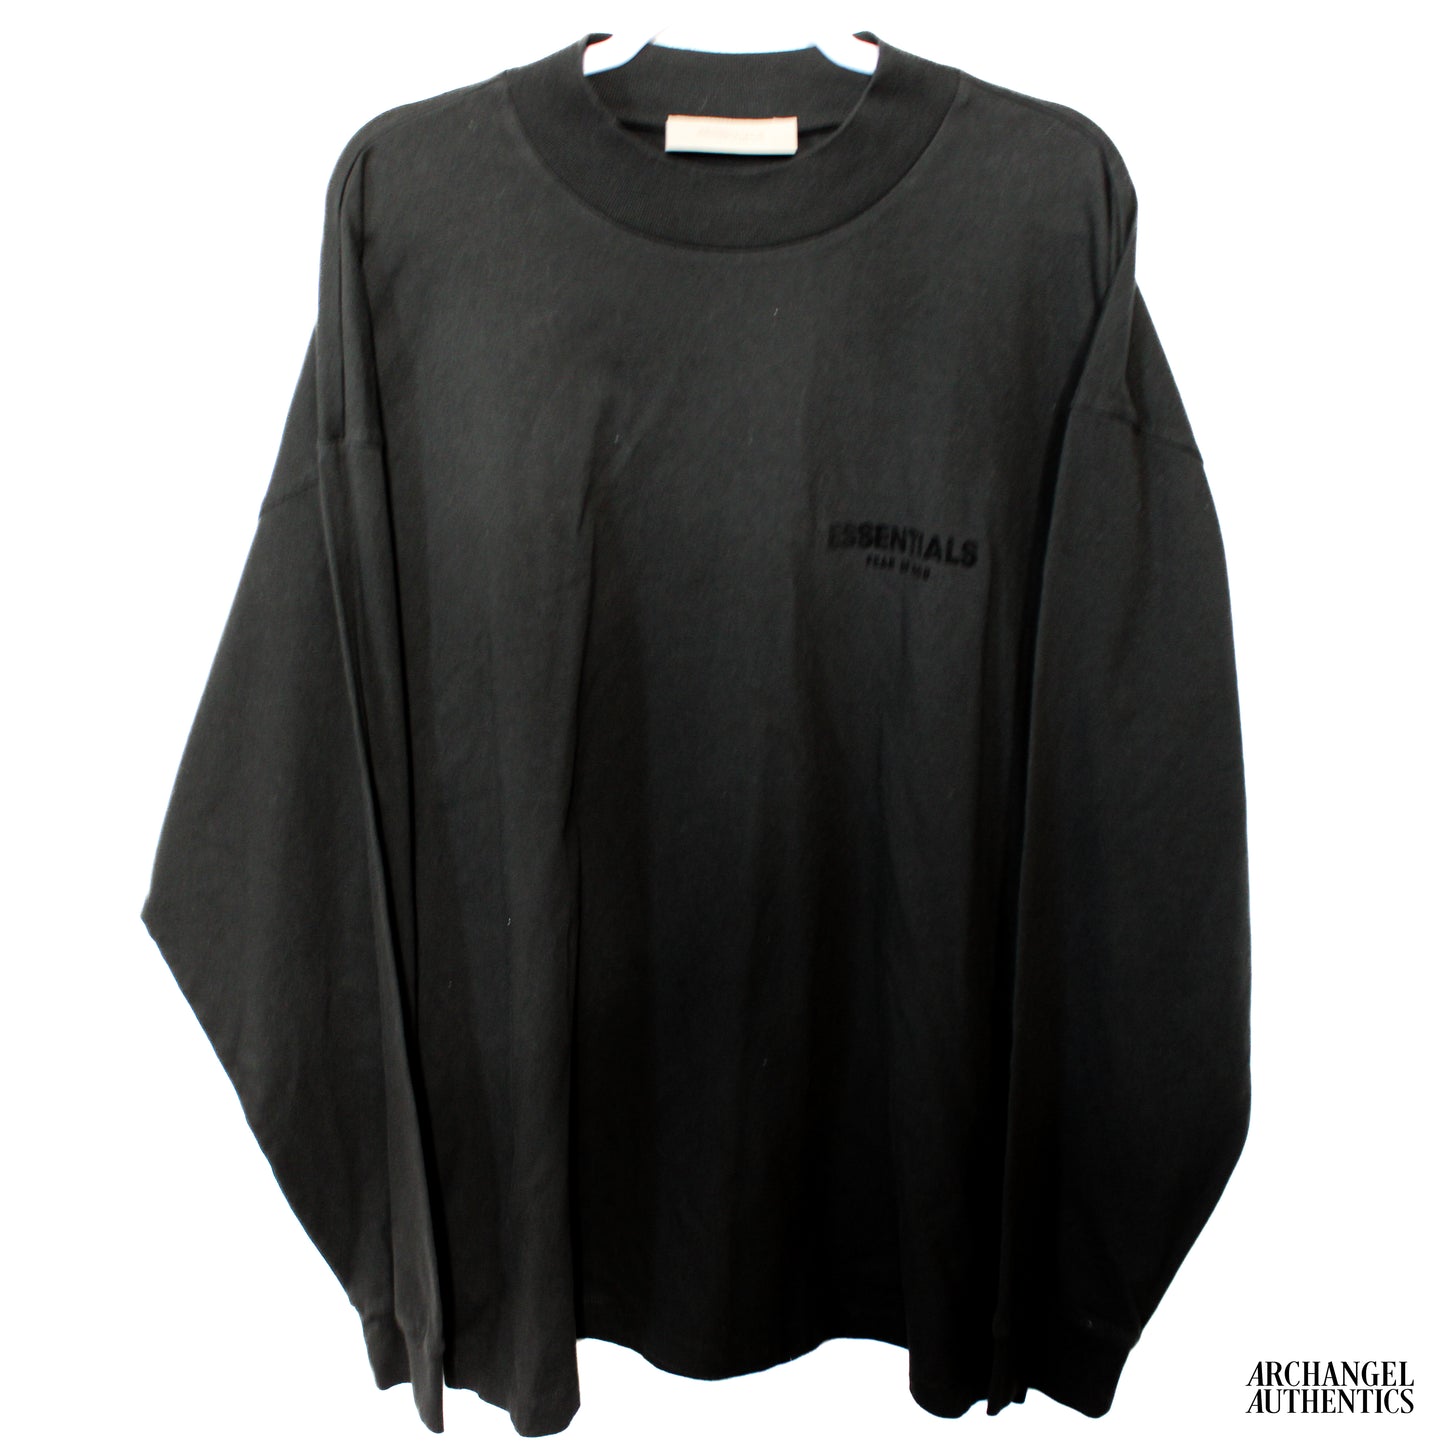 Fear of God Essentials Long Sleeve Tee SS22 Stretch Limo/Black